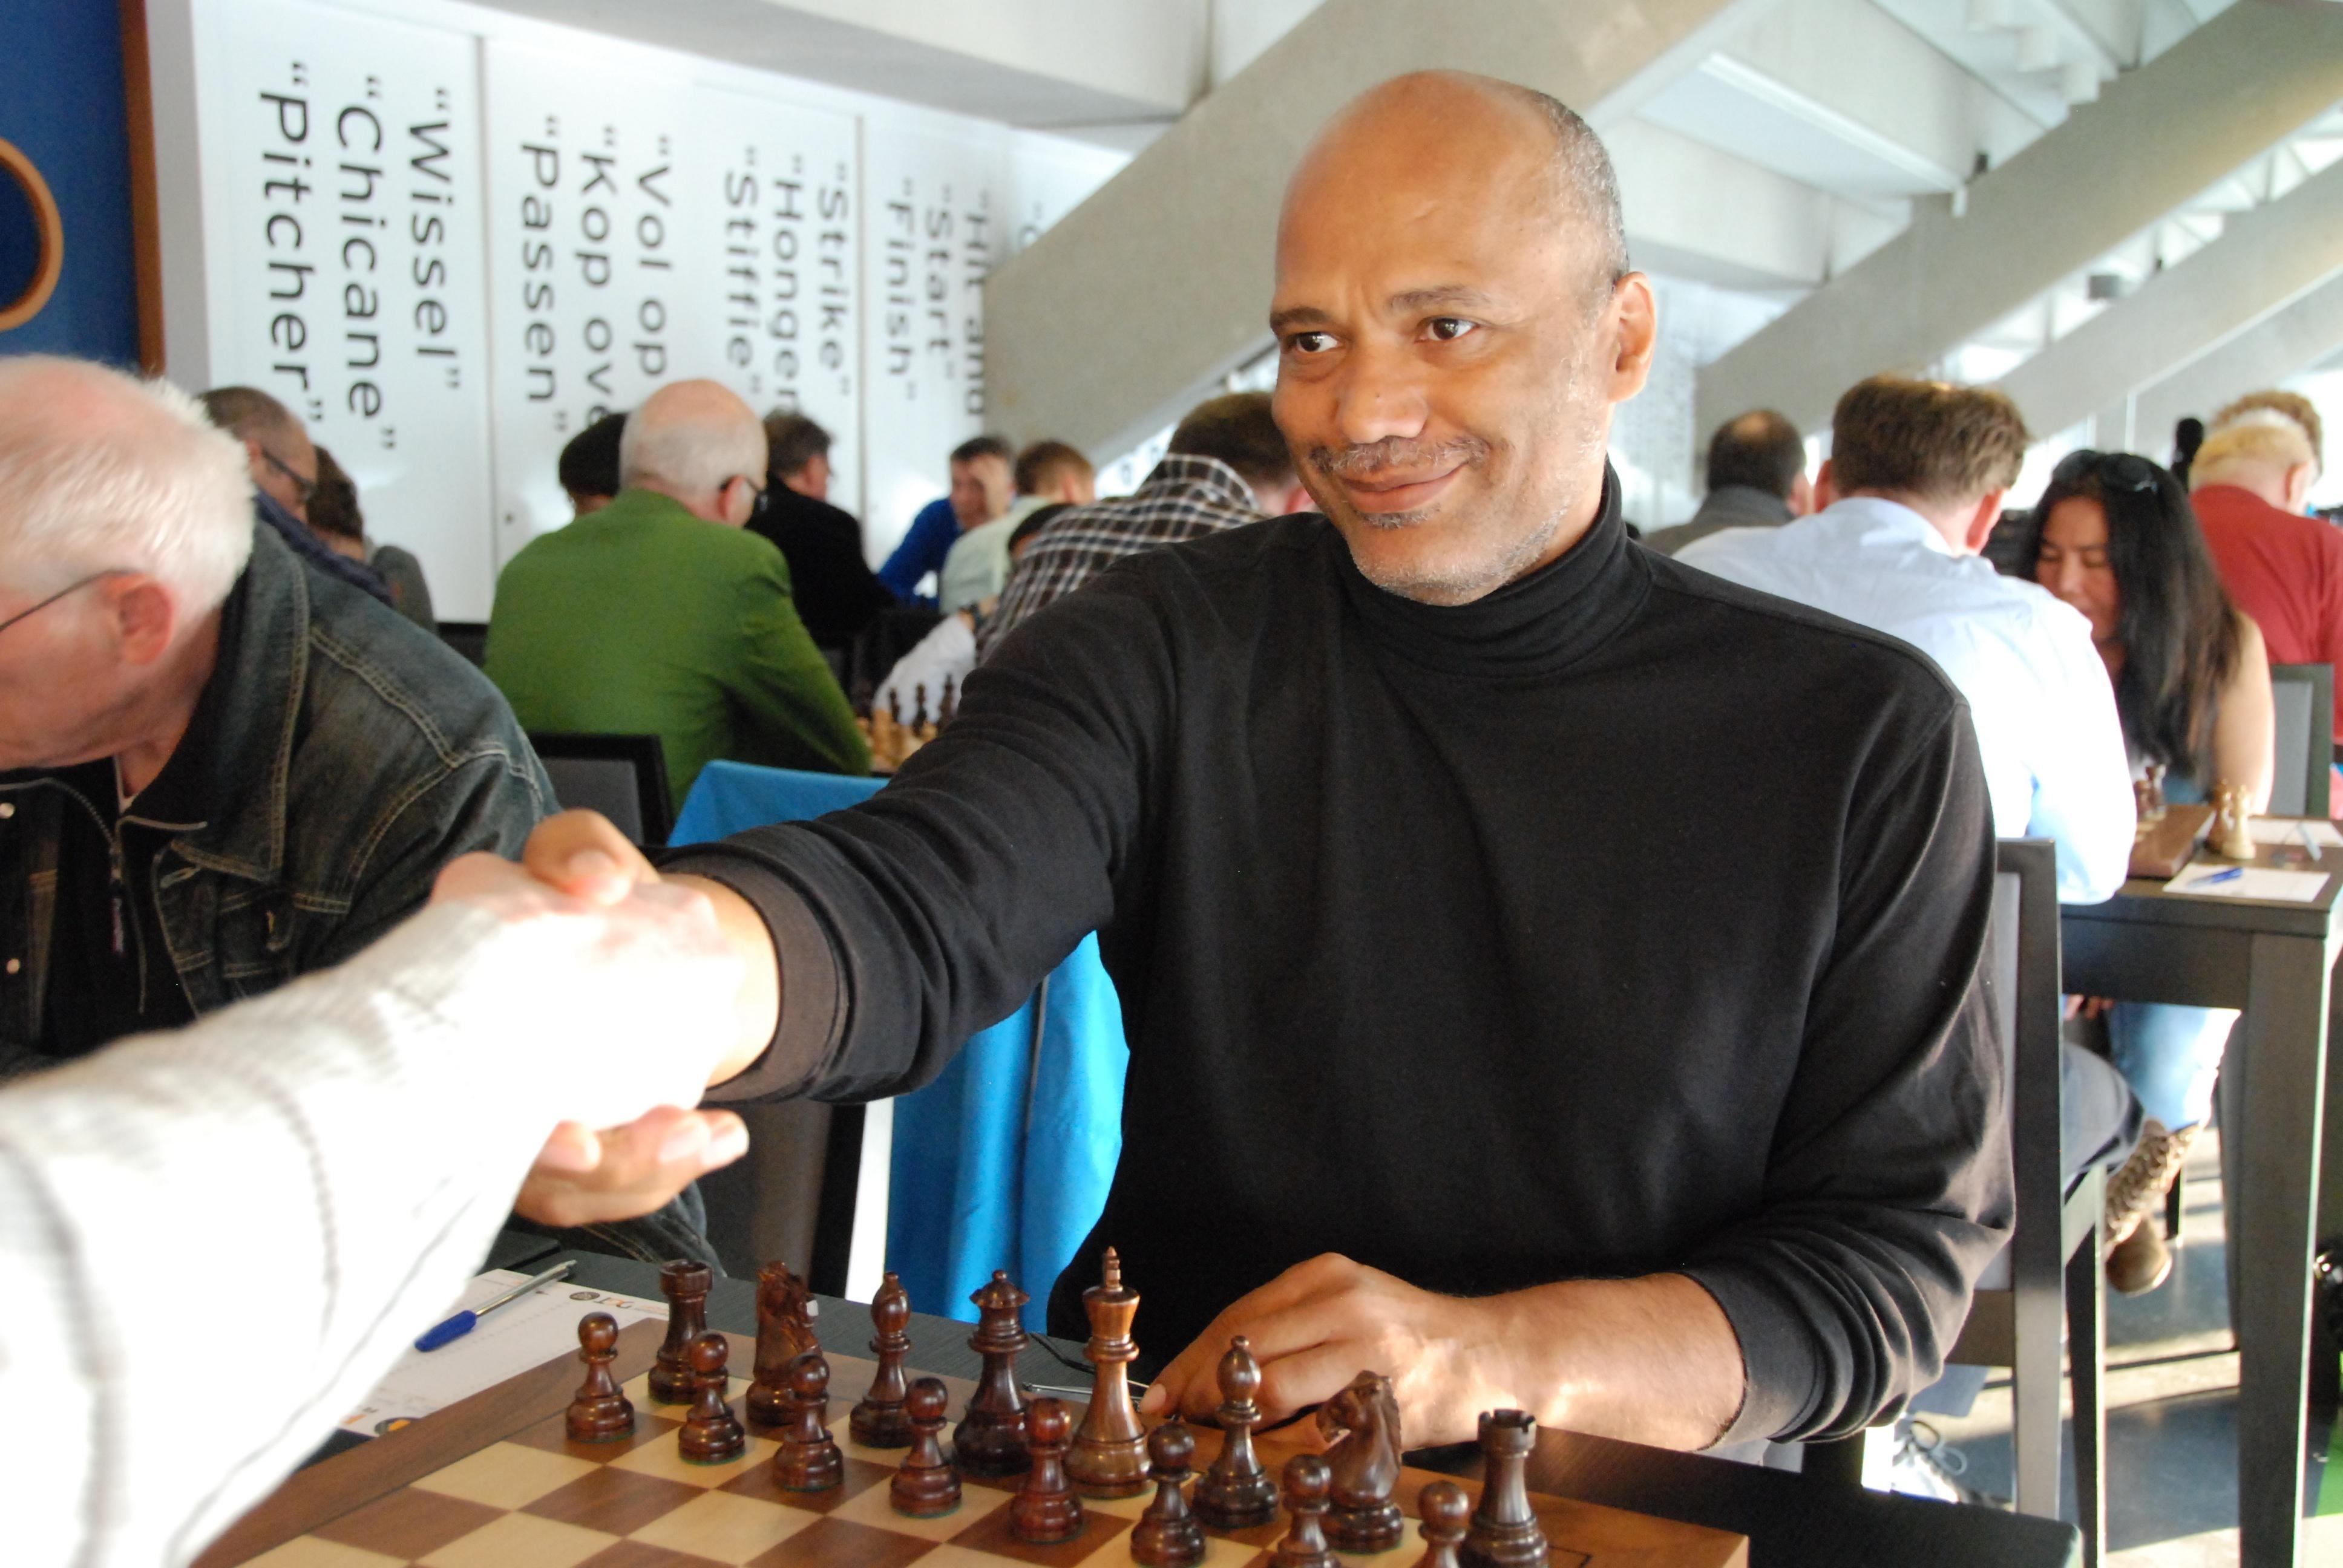 Pride of Chess' at Players' Ring one more weekend